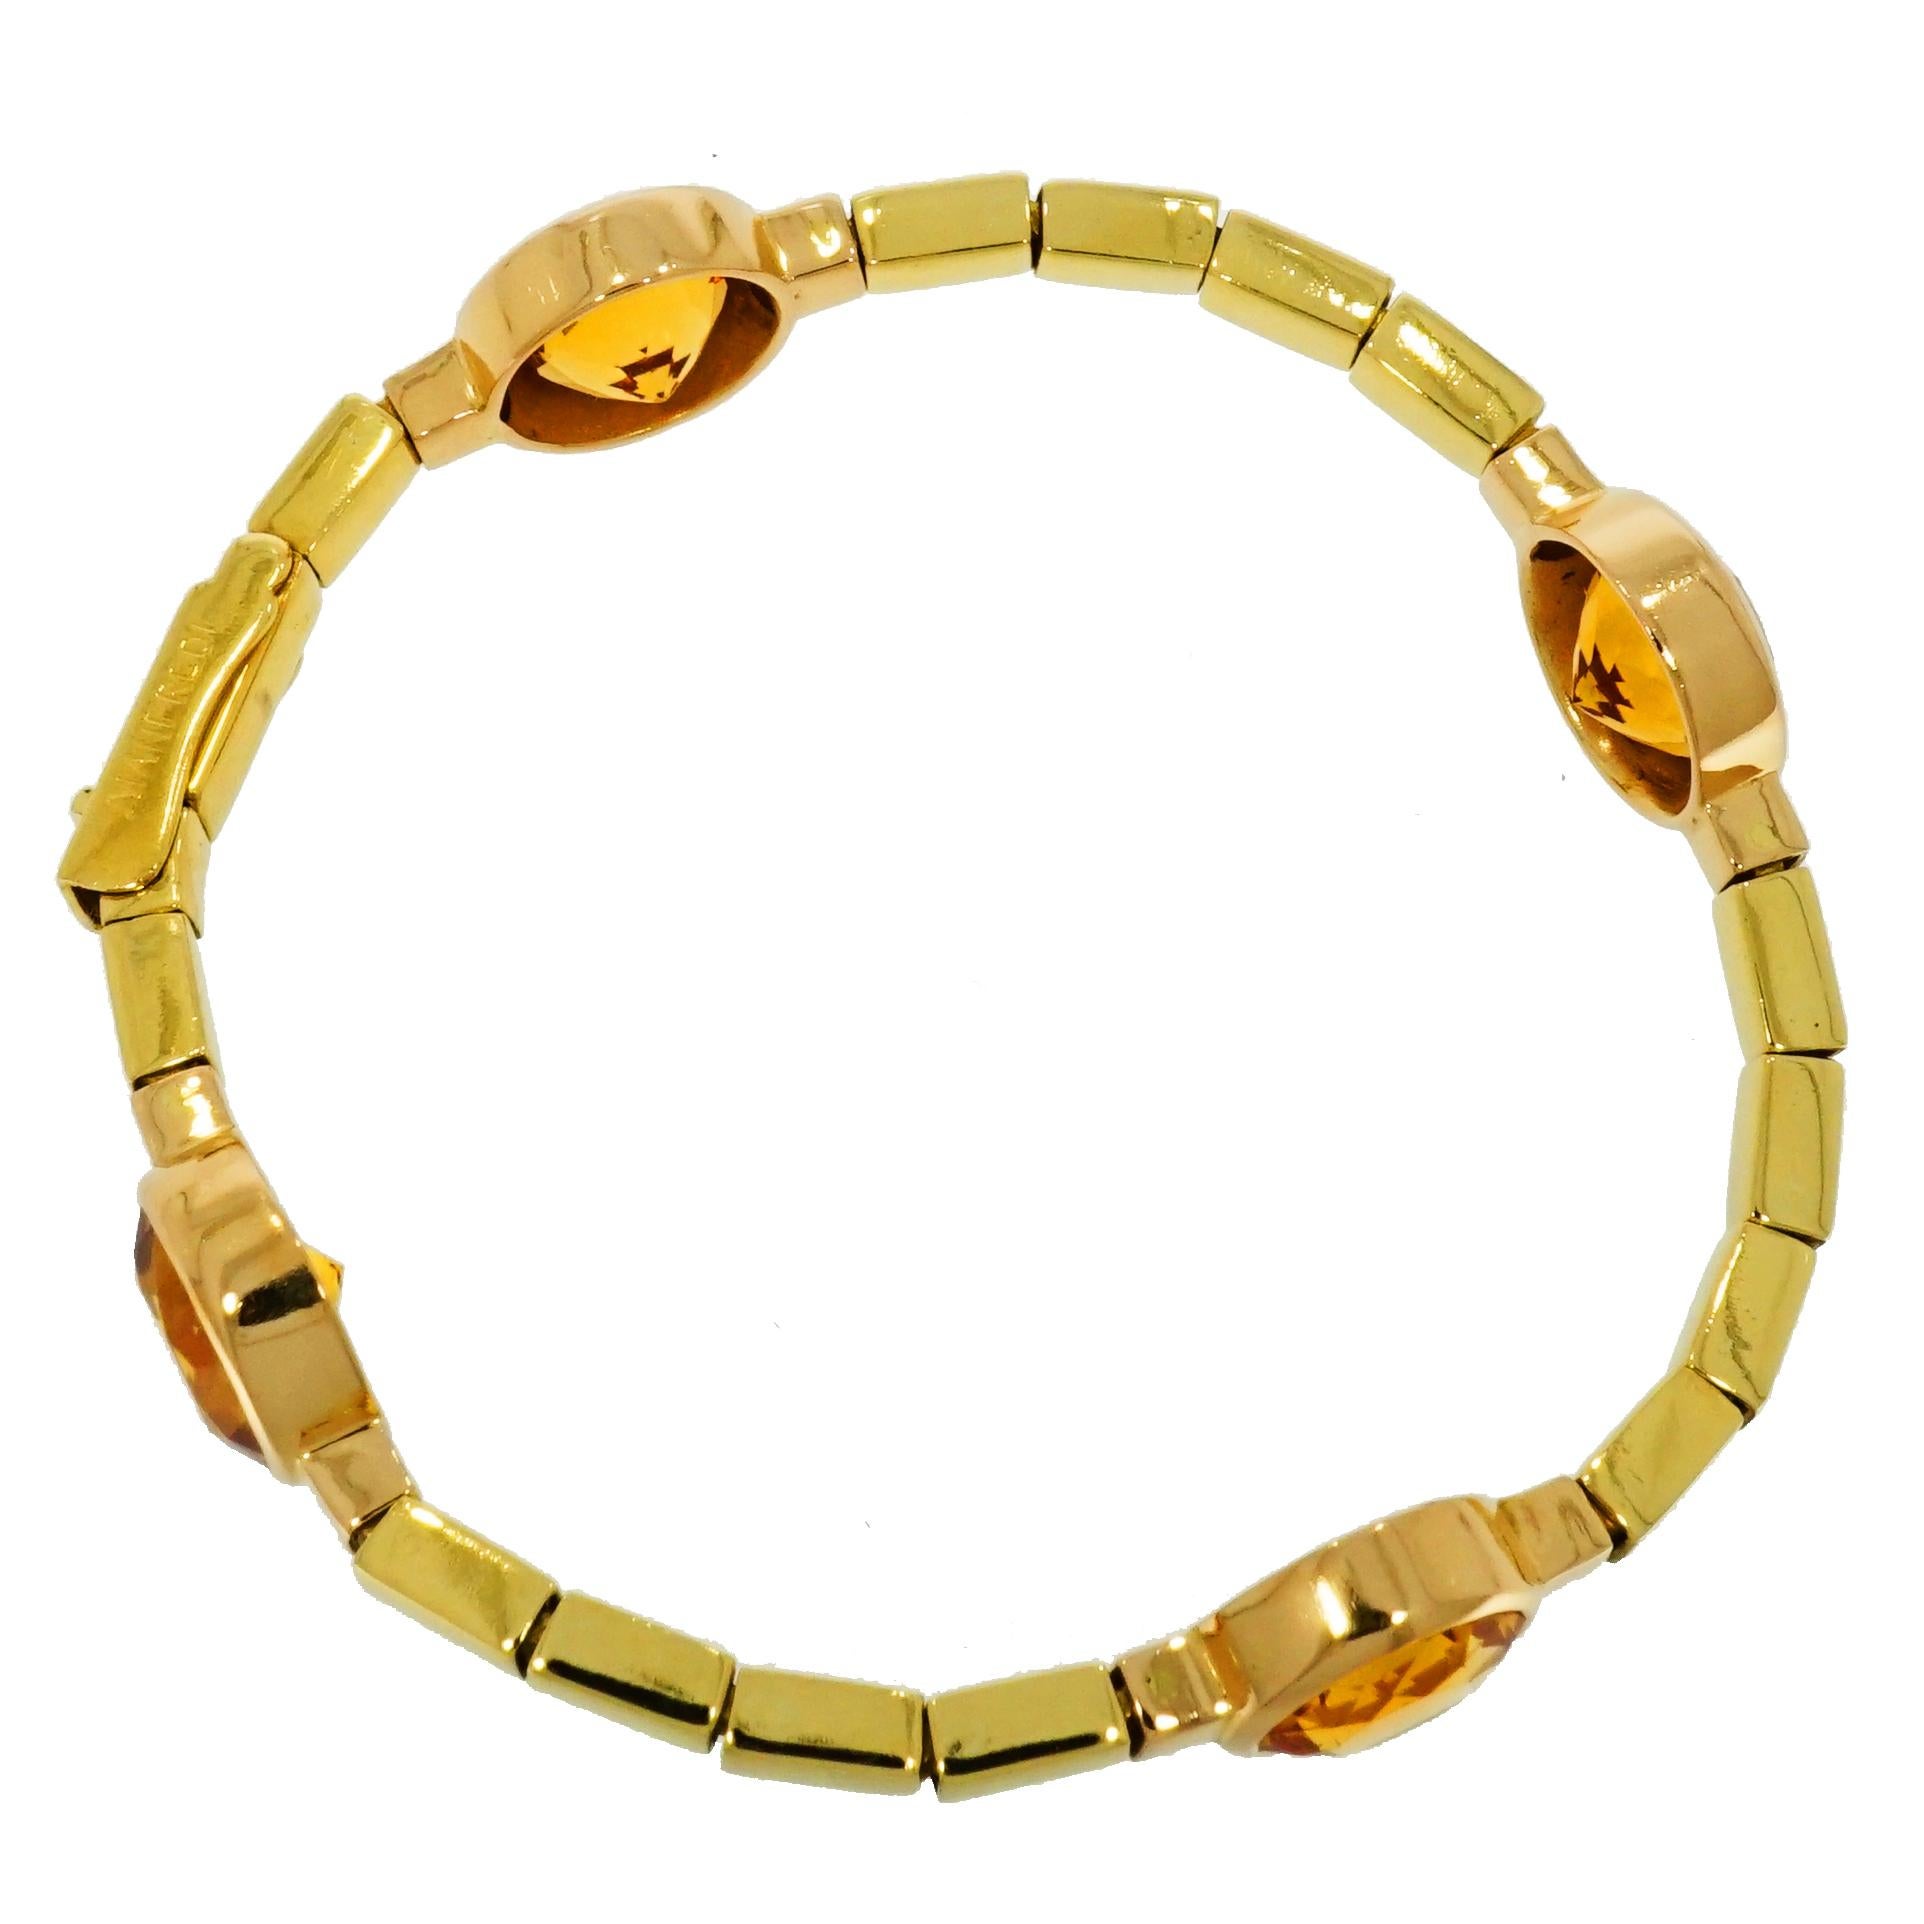 Gorgeous Bracelet!! Very clean and tailored design.
Handcrafted in Italy by Manfredi in high polished 18k Yellow Gold straight links connecting four bezel set 12mm Round Citrine. 
The Bracelet measures 7 inches.
A must have in your collection ;)